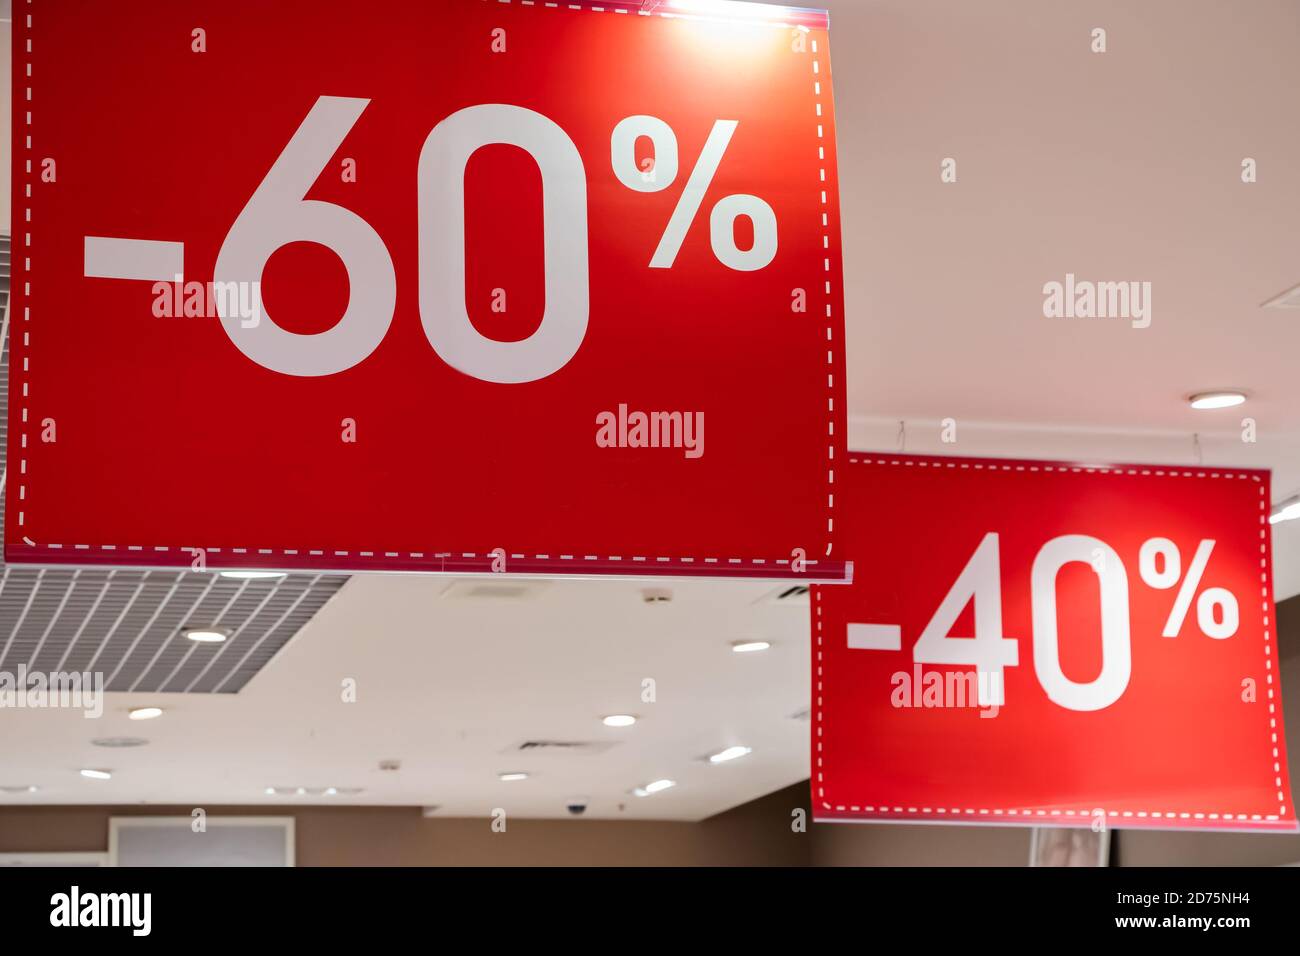 Discount banner for sale in a shopping center. Stock Photo